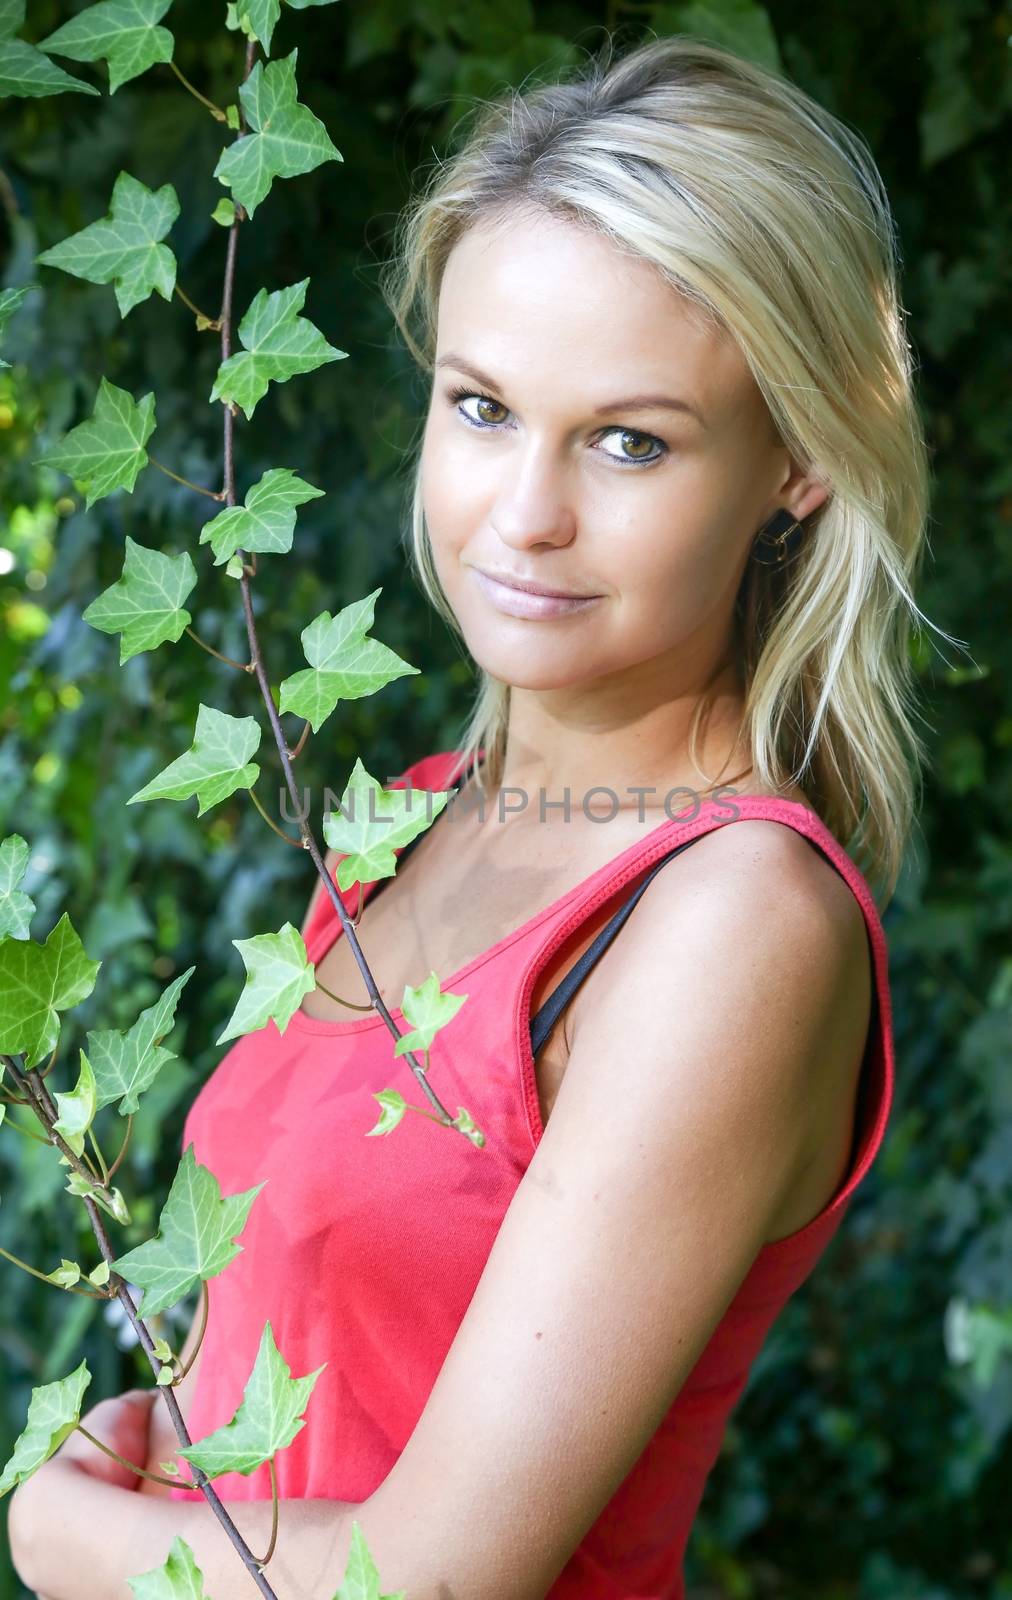 Lovely Young Lady in Garden by fouroaks